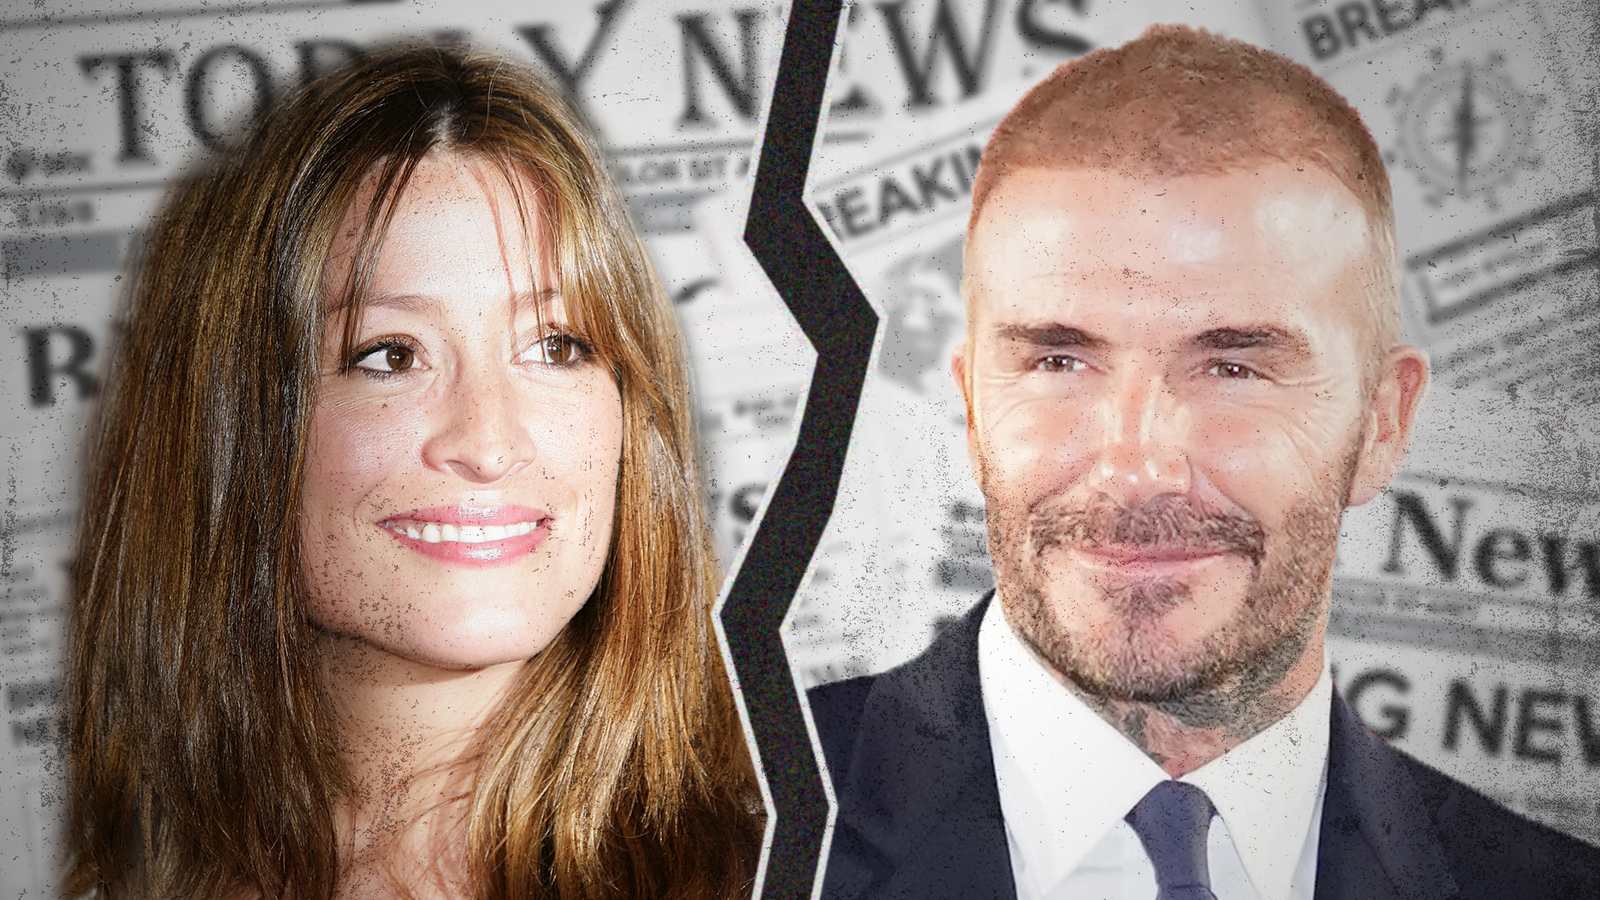 David Beckham's alleged affair with his former PA Rebecca Loos – a